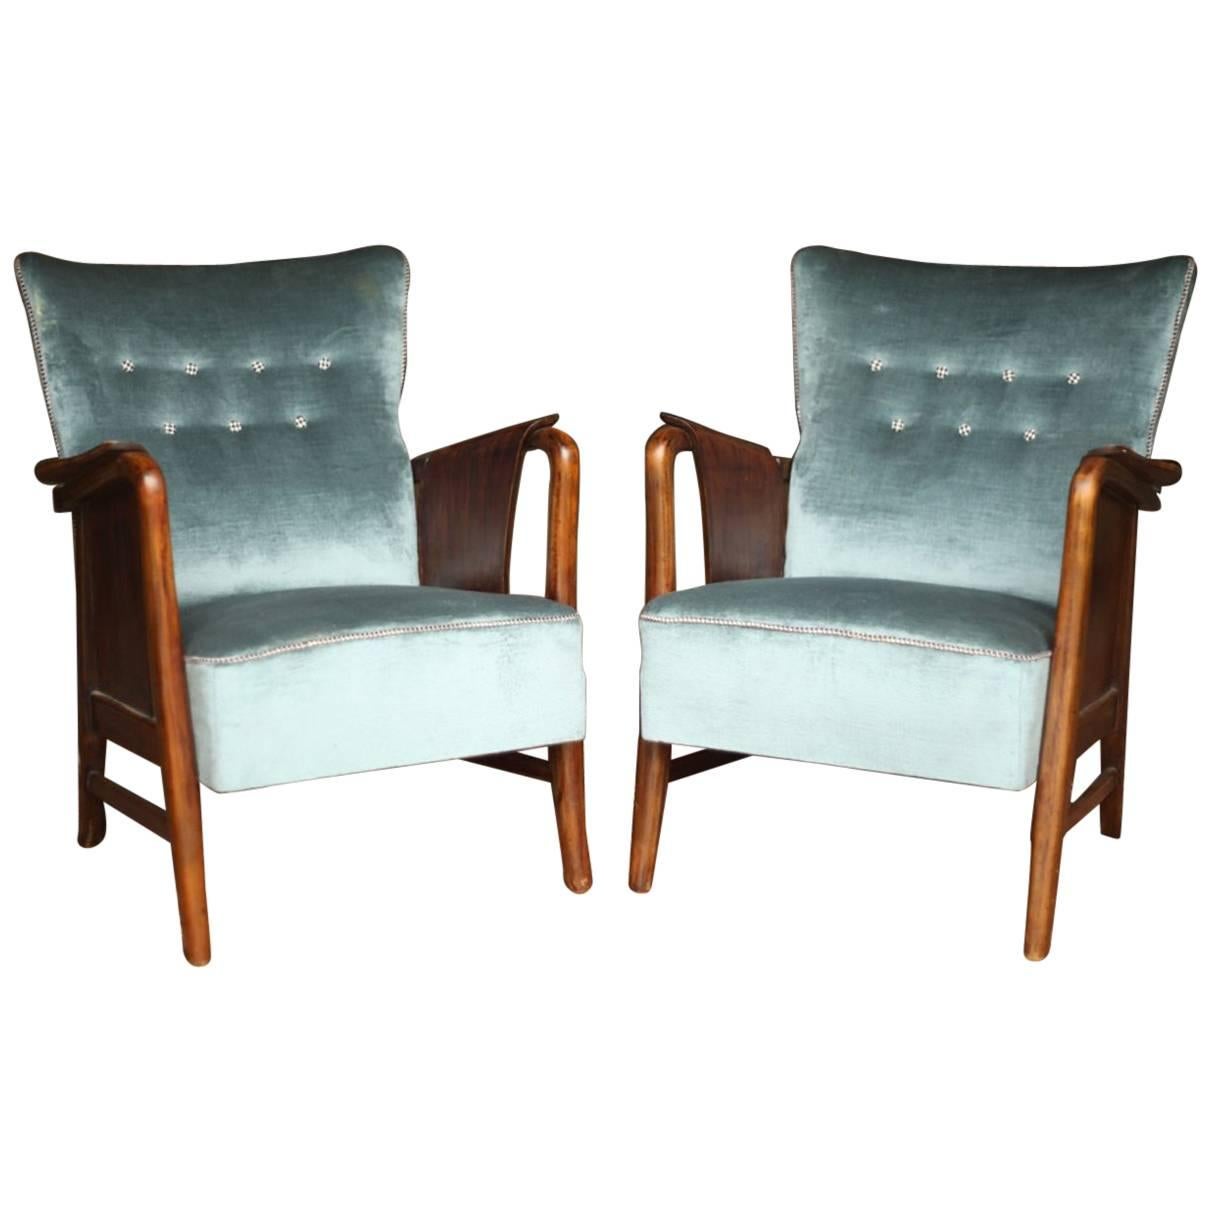 Pair of Fully Reupholstered Midcentury Danish Armchairs